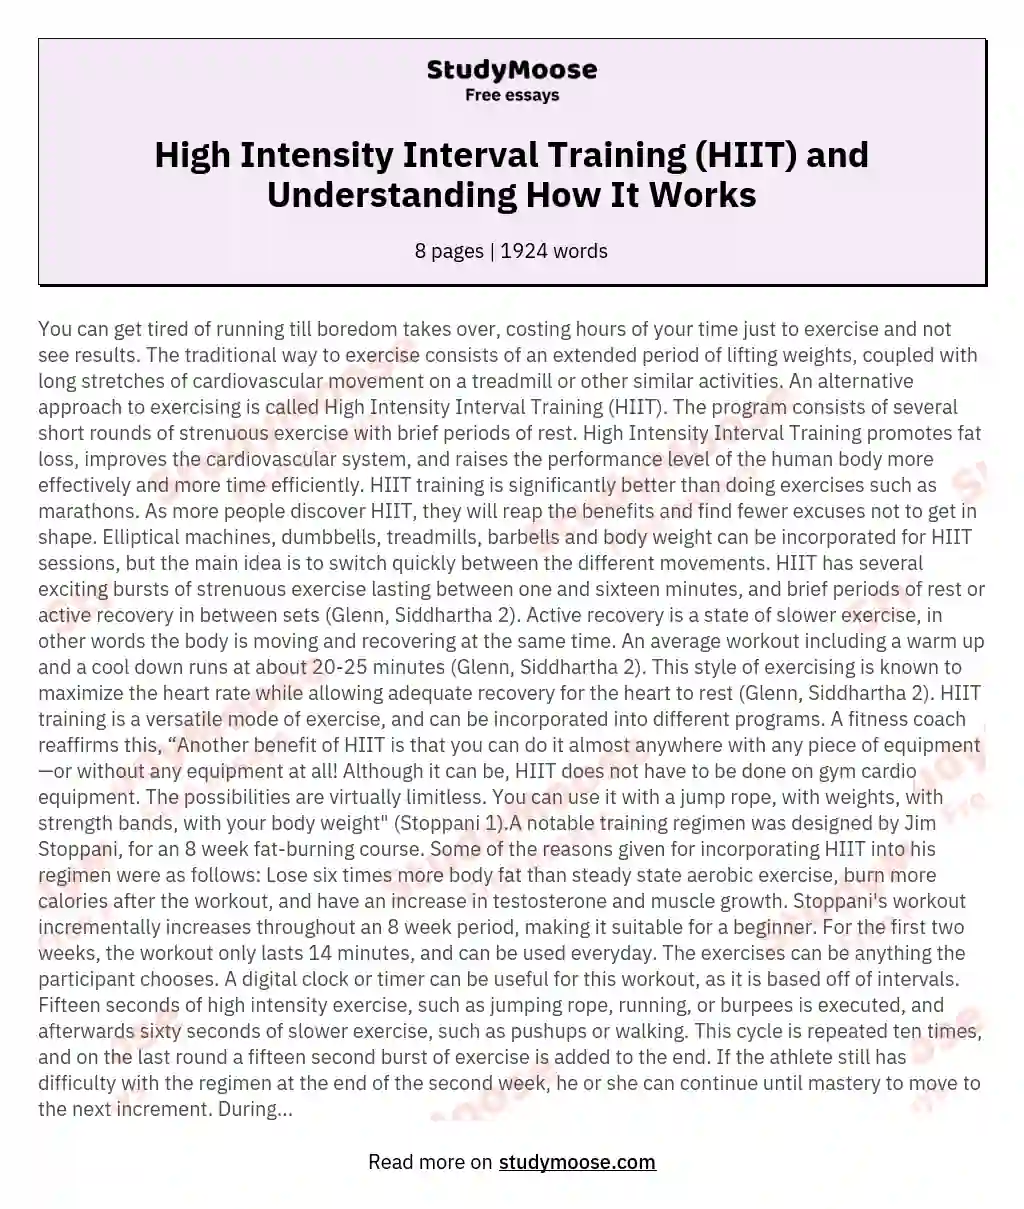 High Intensity Interval Training (HIIT) and Understanding How It Works essay